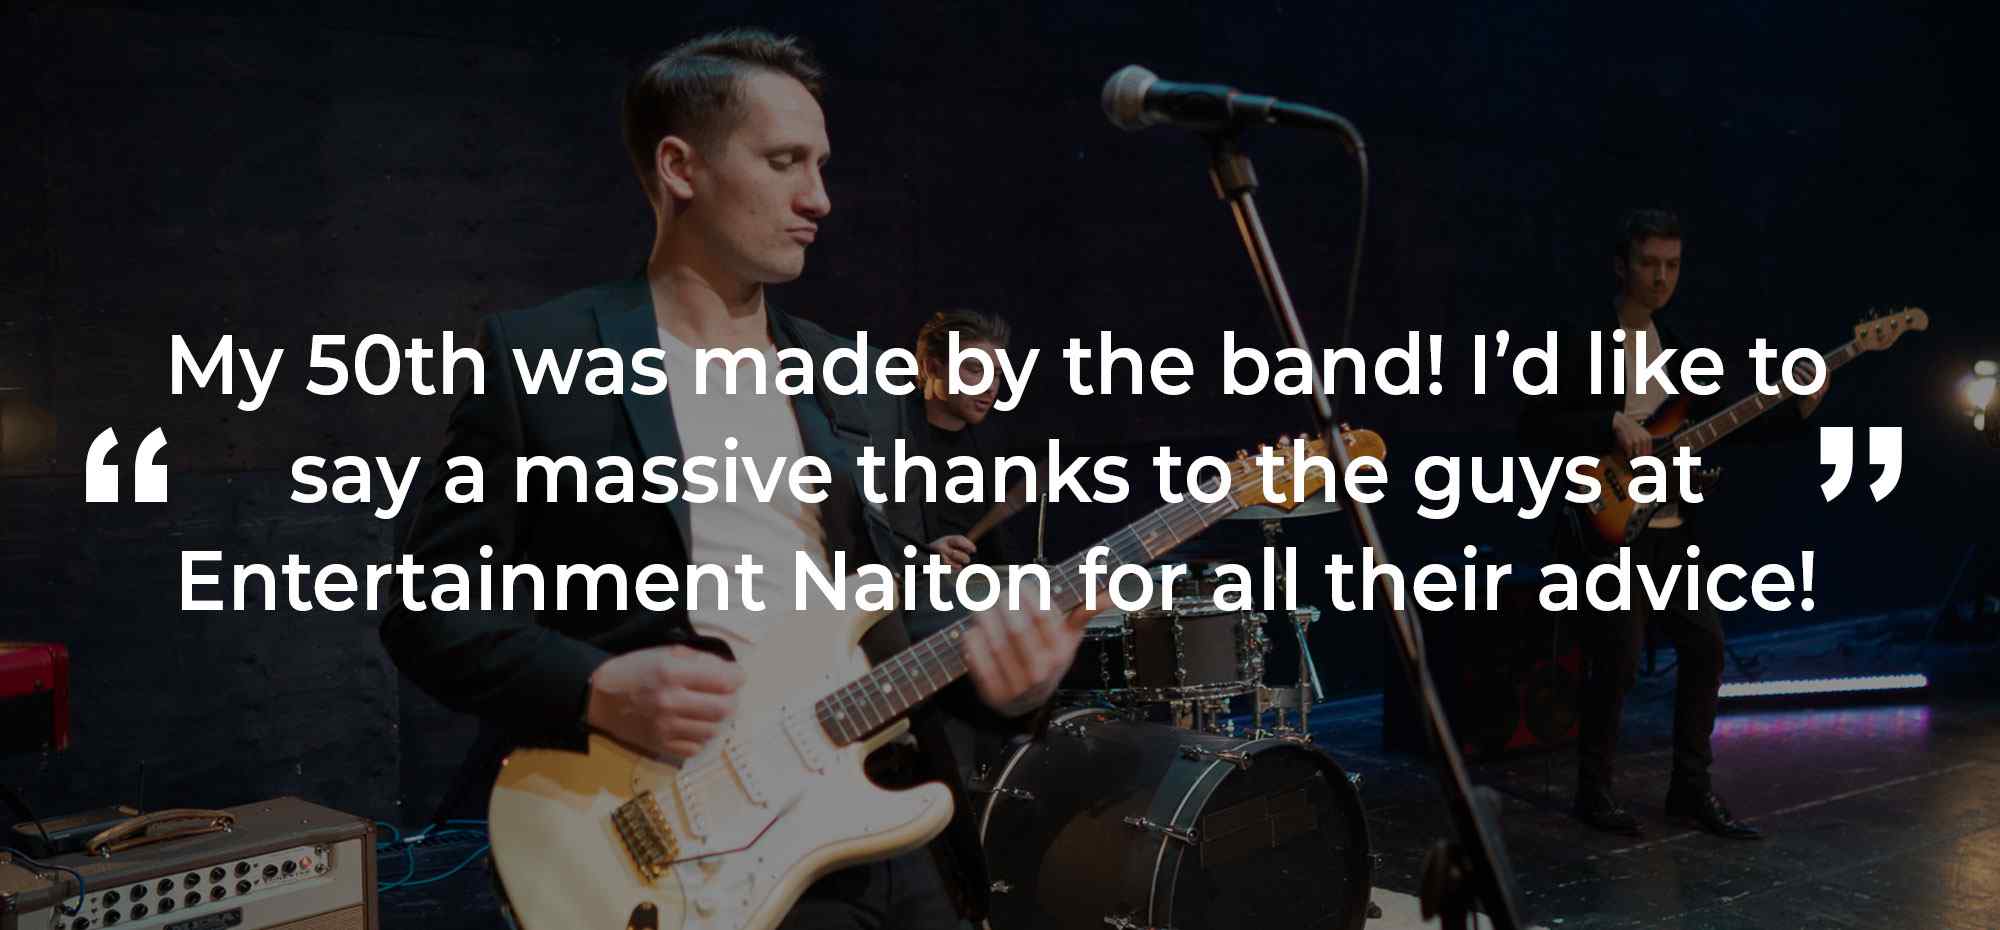 Client Review of a Party Band South Humberside